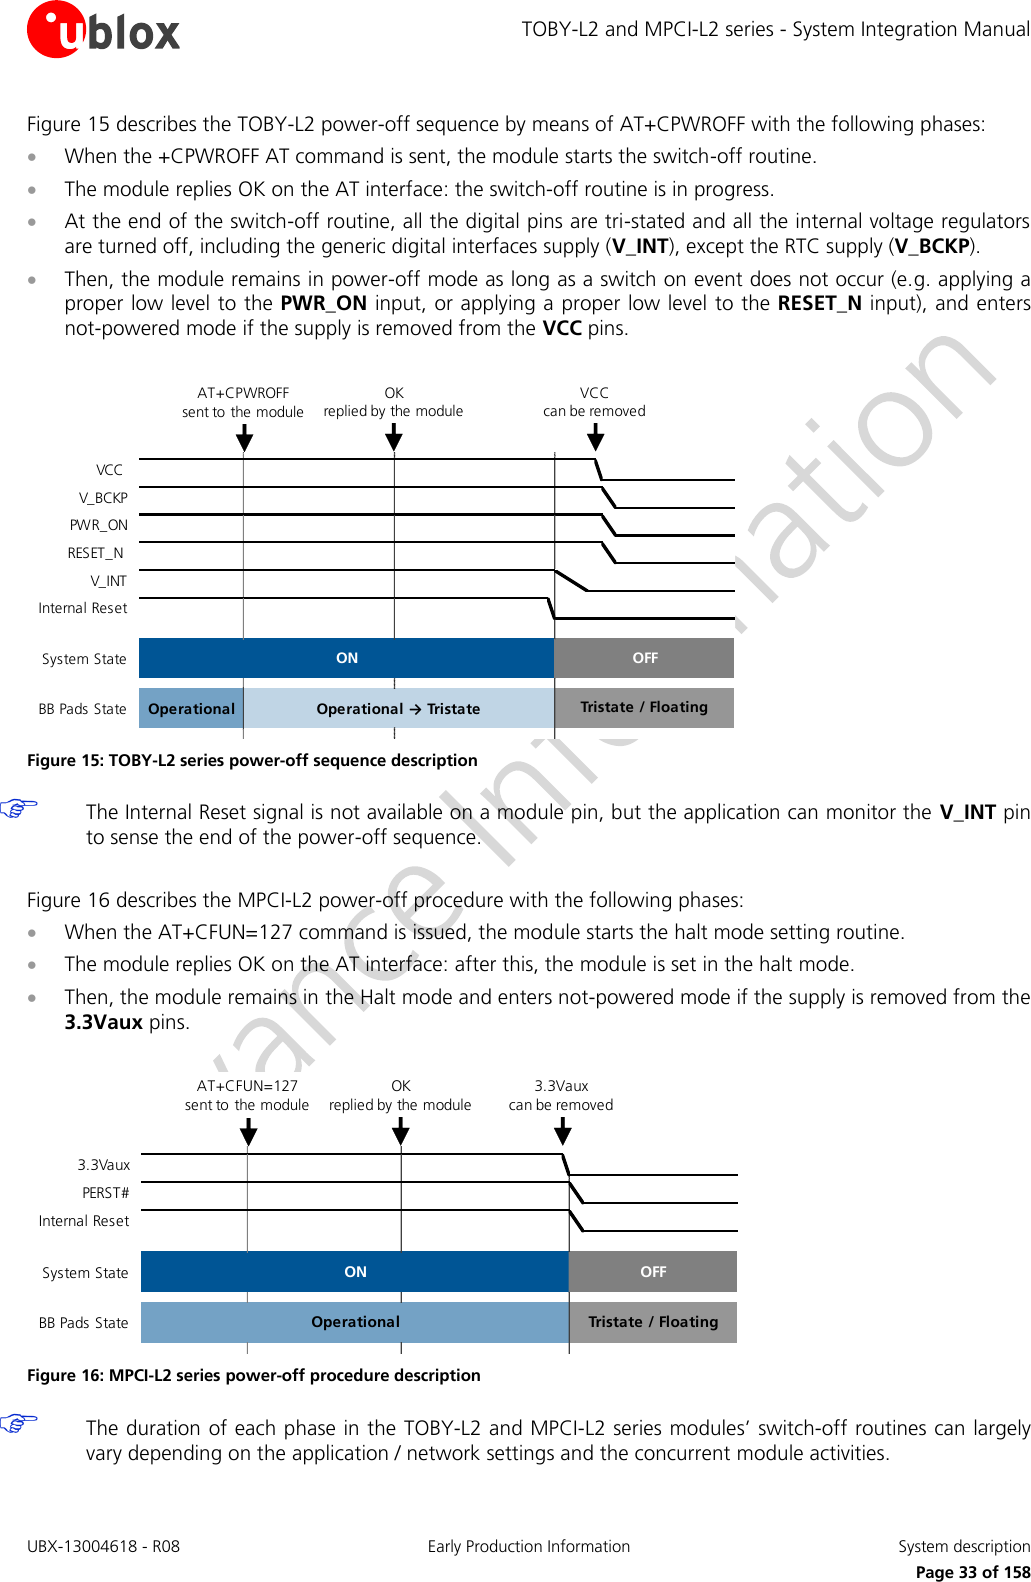 TOBY-L2 and MPCI-L2 series - System Integration Manual UBX-13004618 - R08  Early Production Information  System description     Page 33 of 158 Figure 15 describes the TOBY-L2 power-off sequence by means of AT+CPWROFF with the following phases:  When the +CPWROFF AT command is sent, the module starts the switch-off routine.  The module replies OK on the AT interface: the switch-off routine is in progress.   At the end of the switch-off routine, all the digital pins are tri-stated and all the internal voltage regulators are turned off, including the generic digital interfaces supply (V_INT), except the RTC supply (V_BCKP).  Then, the module remains in power-off mode as long as a switch on event does not occur (e.g. applying a proper low level to the PWR_ON input, or applying a proper low level to the RESET_N input), and enters not-powered mode if the supply is removed from the VCC pins.  VCC V_BCKPPWR_ONRESET_N V_INTInternal ResetSystem StateBB Pads State OperationalOFFTristate / FloatingONOperational → TristateAT+CPWROFFsent to the module0 s~2.5 s~5 sOKreplied by the moduleVCC                can be removed Figure 15: TOBY-L2 series power-off sequence description  The Internal Reset signal is not available on a module pin, but the application can monitor the V_INT pin to sense the end of the power-off sequence.  Figure 16 describes the MPCI-L2 power-off procedure with the following phases:  When the AT+CFUN=127 command is issued, the module starts the halt mode setting routine.  The module replies OK on the AT interface: after this, the module is set in the halt mode.  Then, the module remains in the Halt mode and enters not-powered mode if the supply is removed from the 3.3Vaux pins.  3.3VauxPERST#Internal ResetSystem StateBB Pads StateOFFONTristate / FloatingOperationalAT+CFUN=127sent to the module0 s~2.5 s~5 sOKreplied by the module3.3Vaux         can be removed Figure 16: MPCI-L2 series power-off procedure description  The duration of each phase in the TOBY-L2 and MPCI-L2 series modules’ switch-off routines can largely vary depending on the application / network settings and the concurrent module activities.  